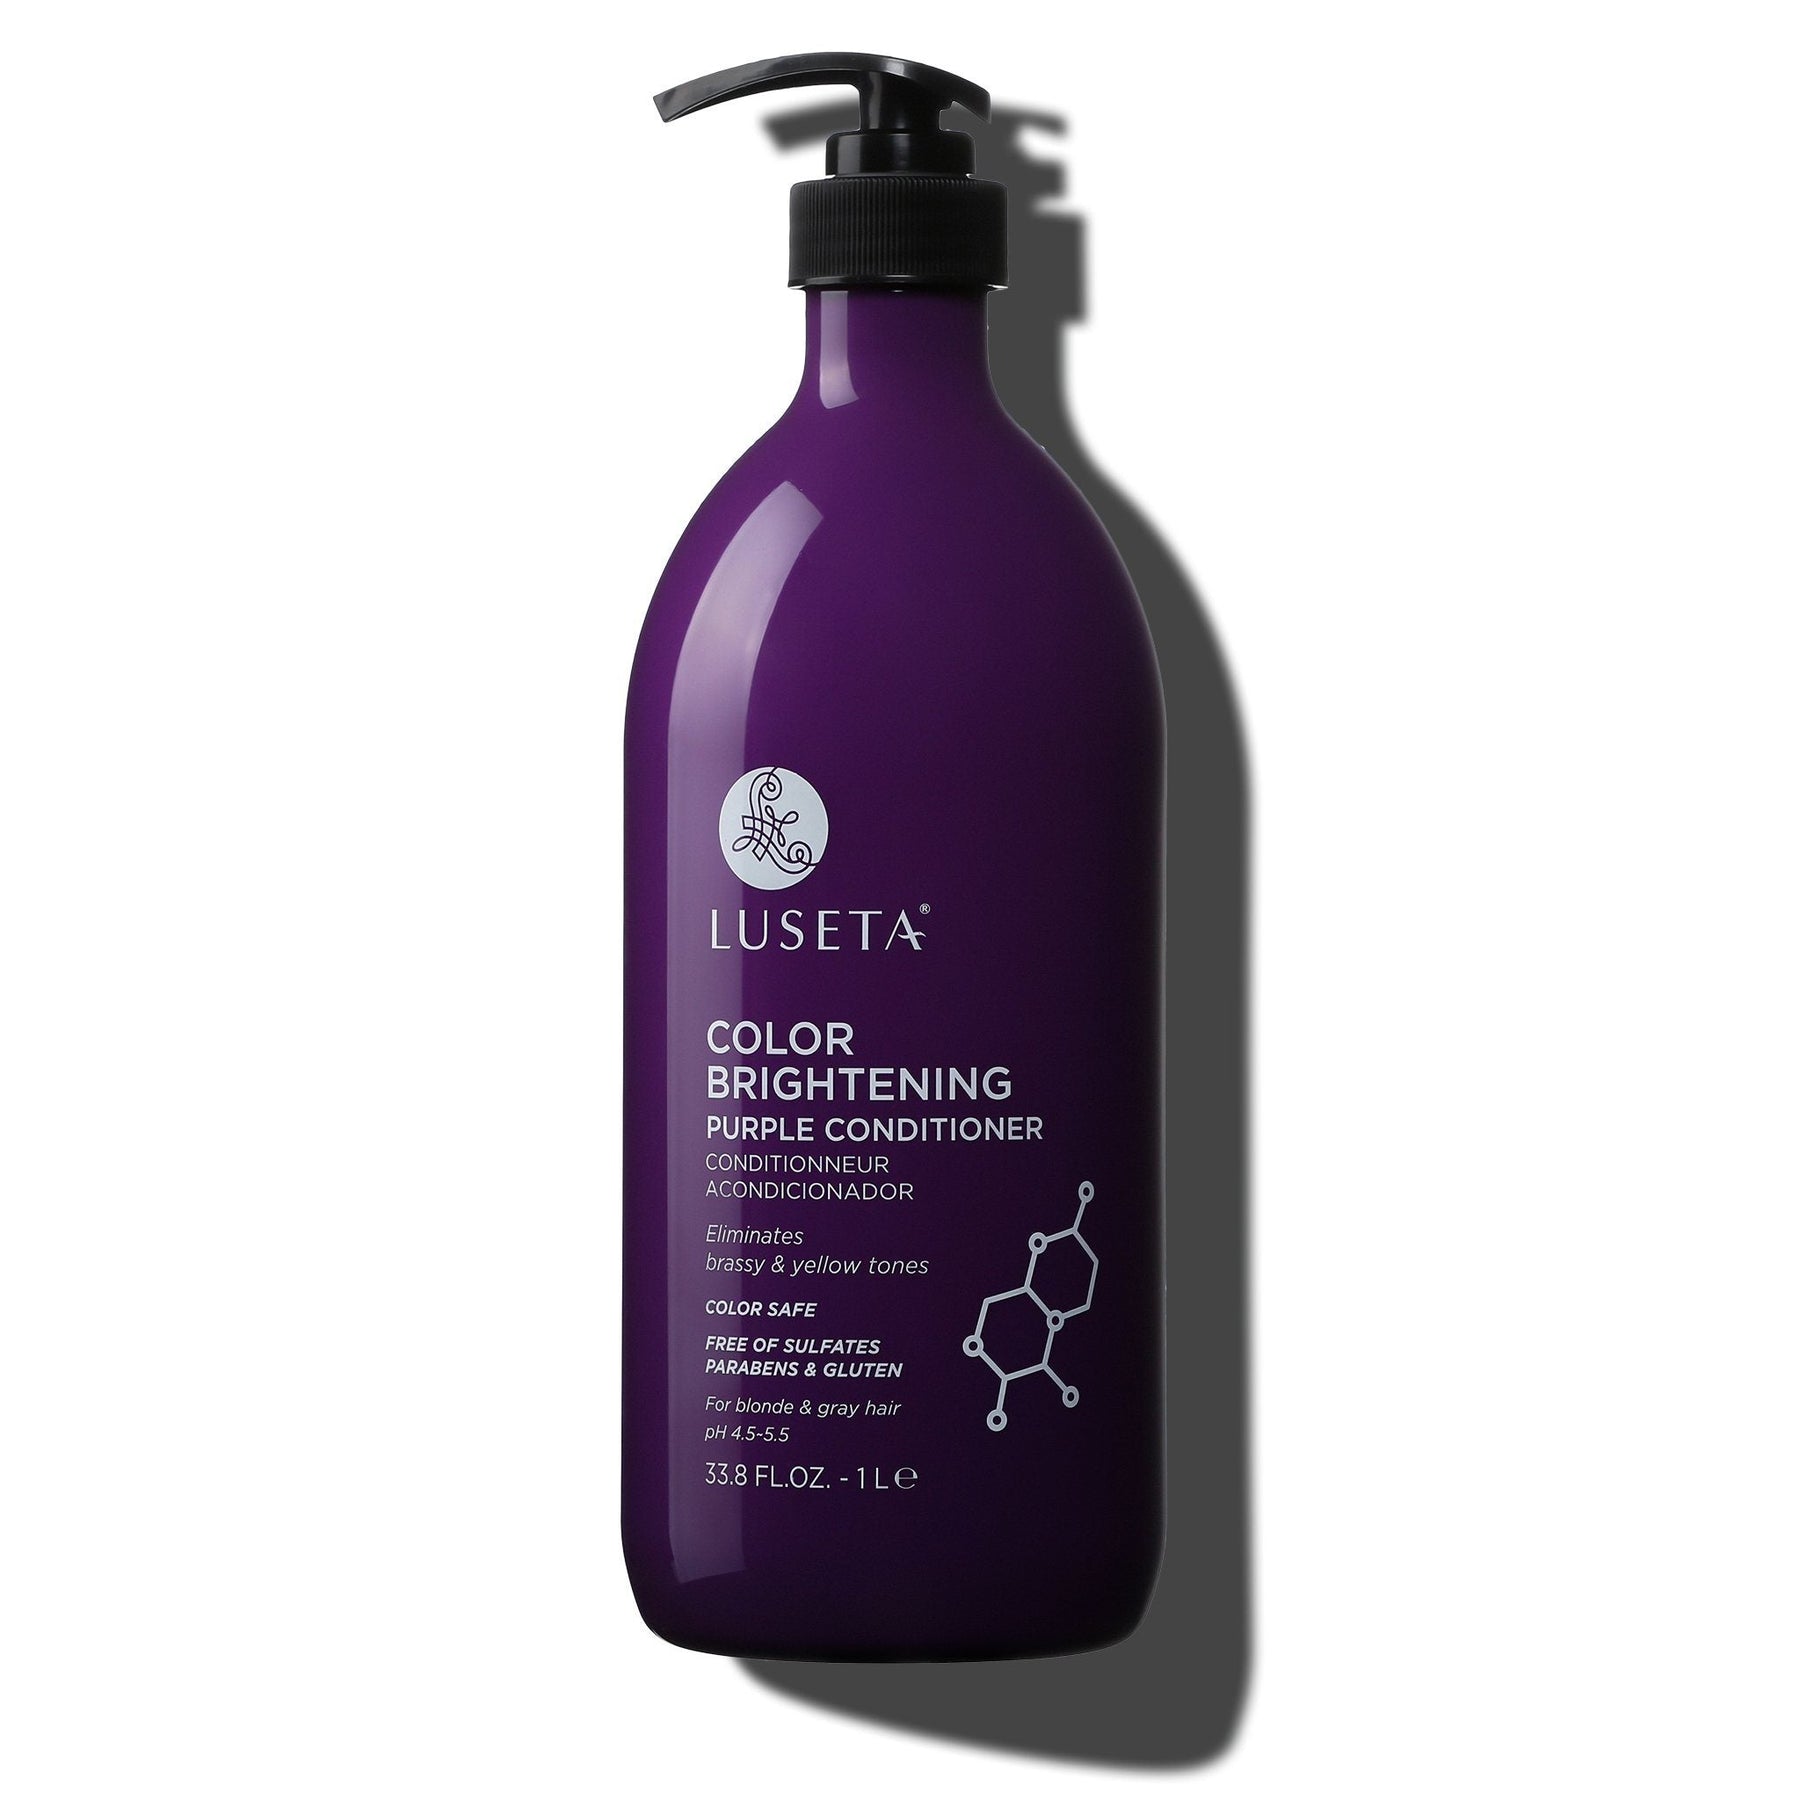 Color Brightening Purple Conditioner - 33.8oz - by Luseta Beauty |ProCare Outlet|